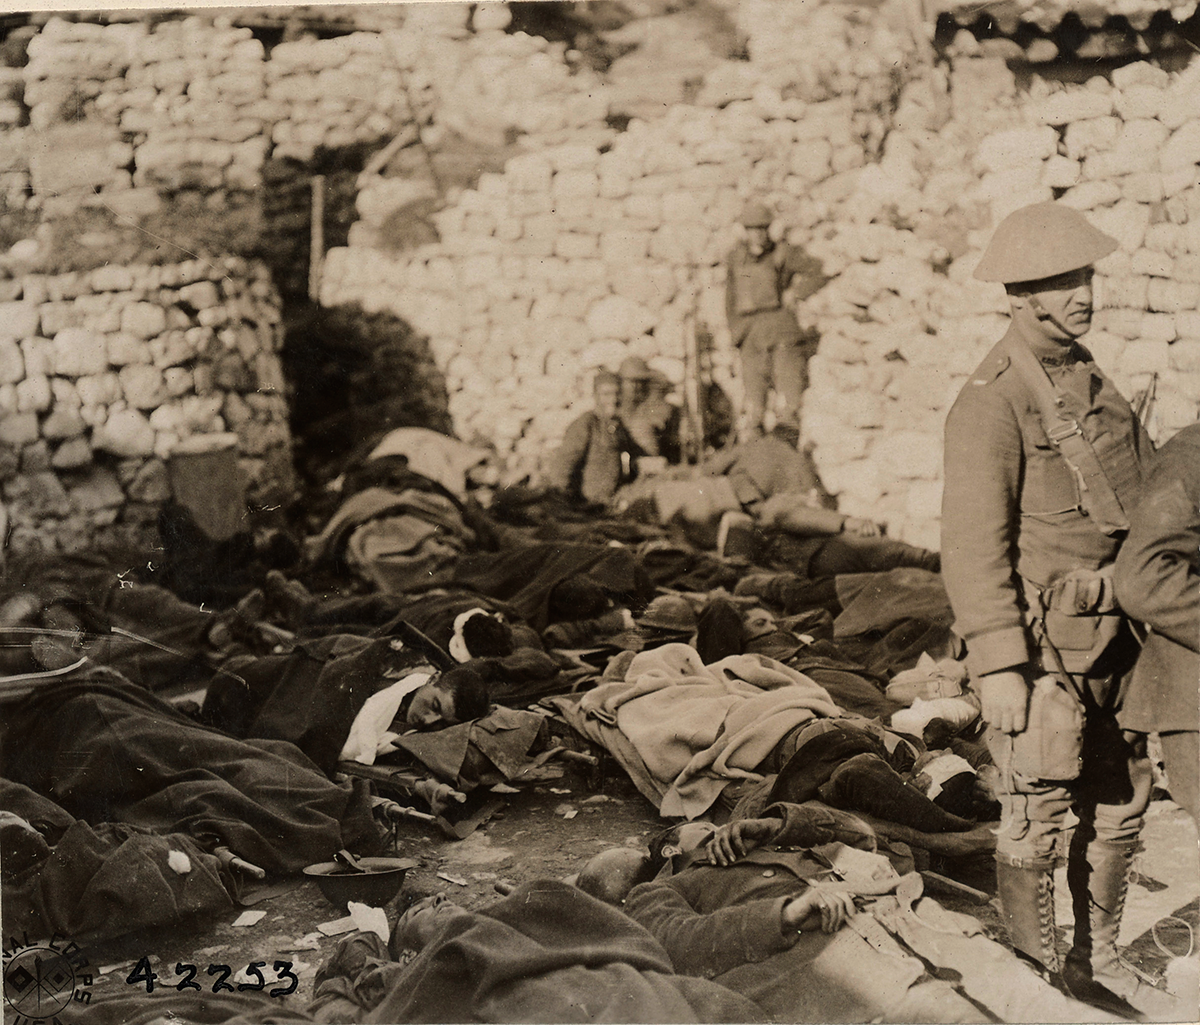 Sepia tone of Soldiers sleeping under blankets on ground